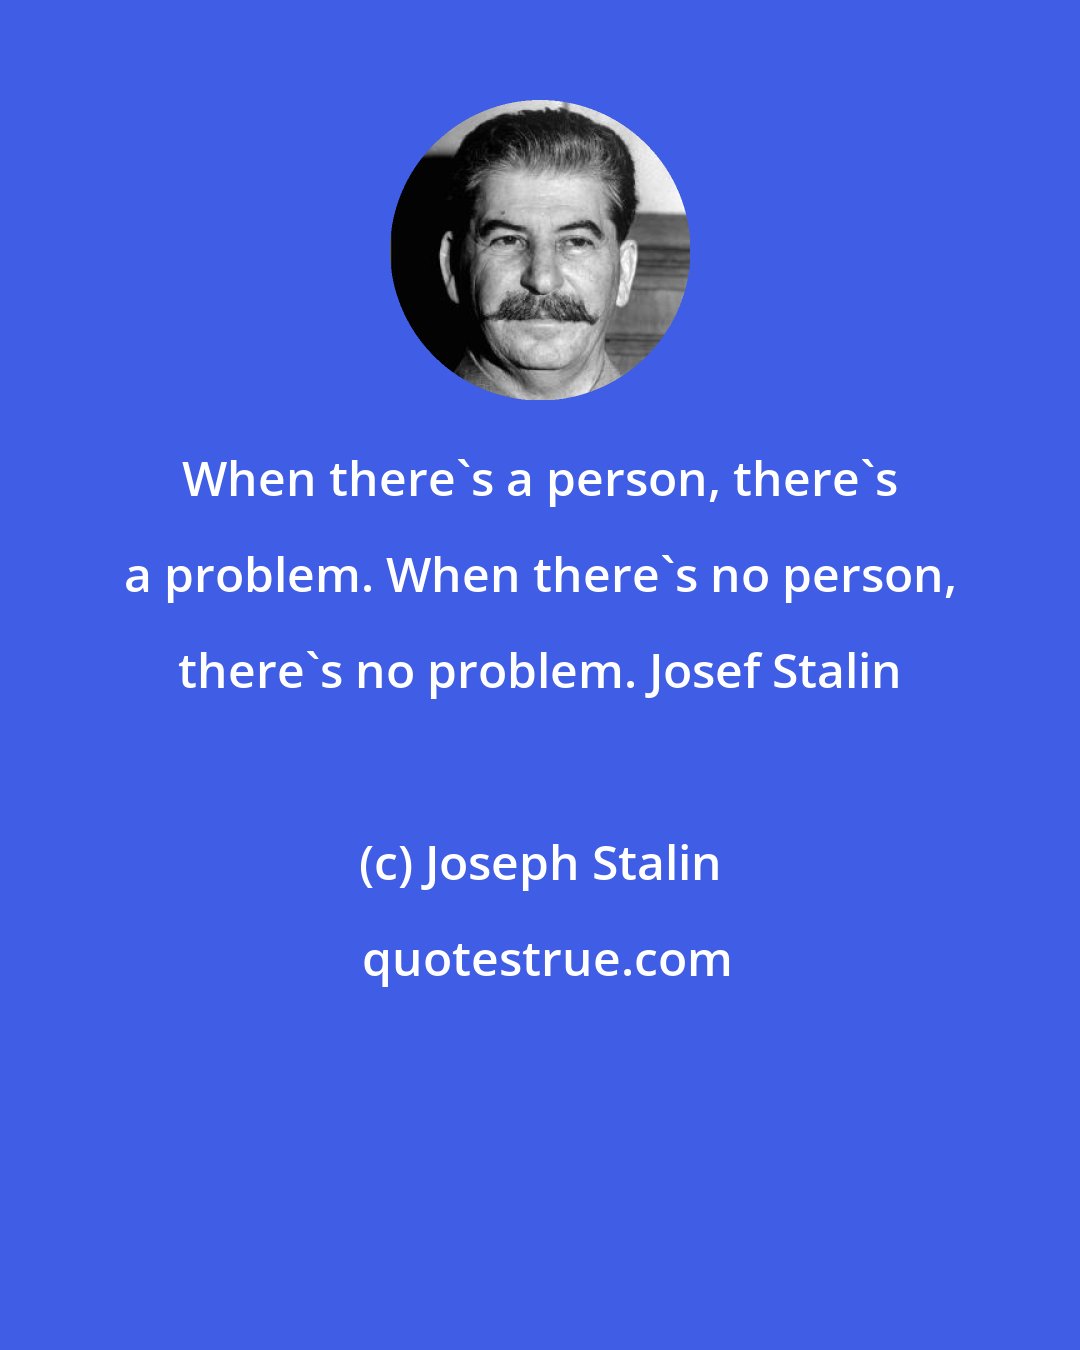 Joseph Stalin: When there's a person, there's a problem. When there's no person, there's no problem. Josef Stalin